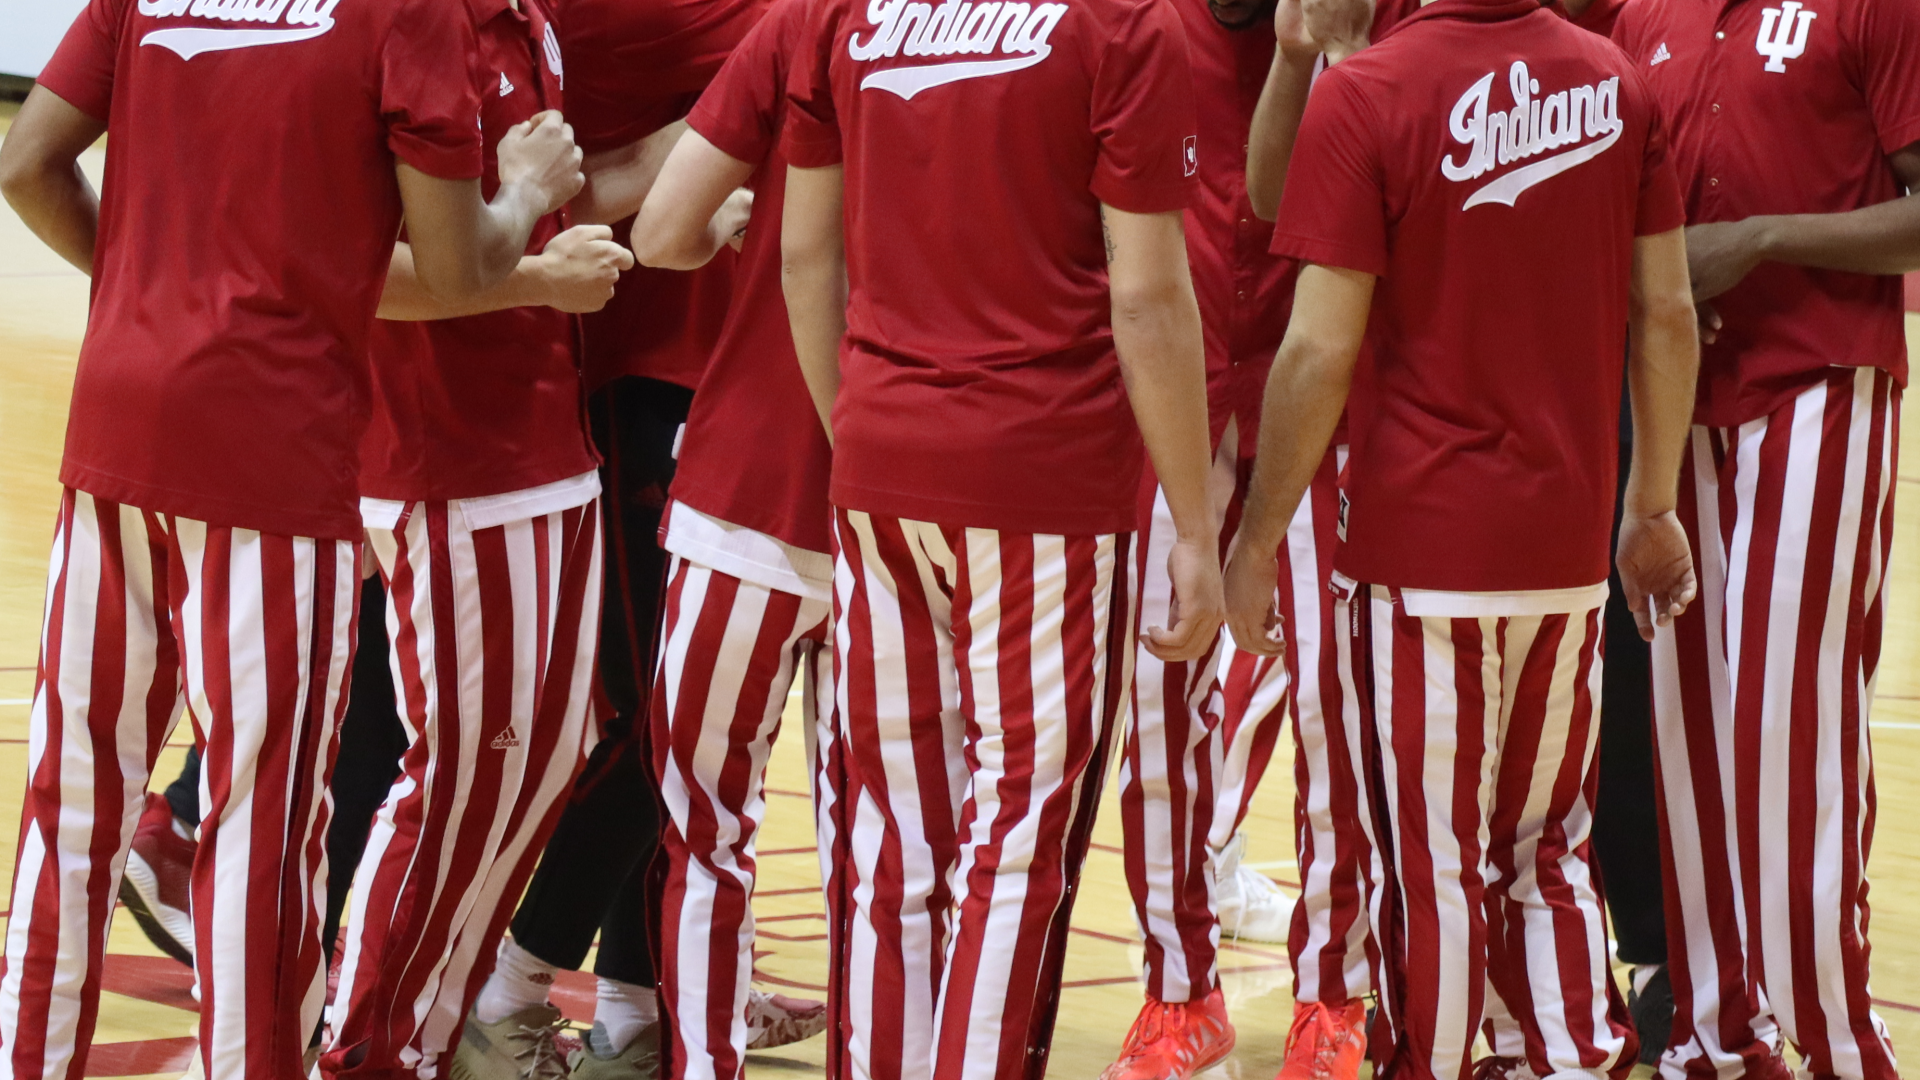 https://www.thedailyhoosier.com/wp-content/uploads/2021/05/Candy-stripes.png